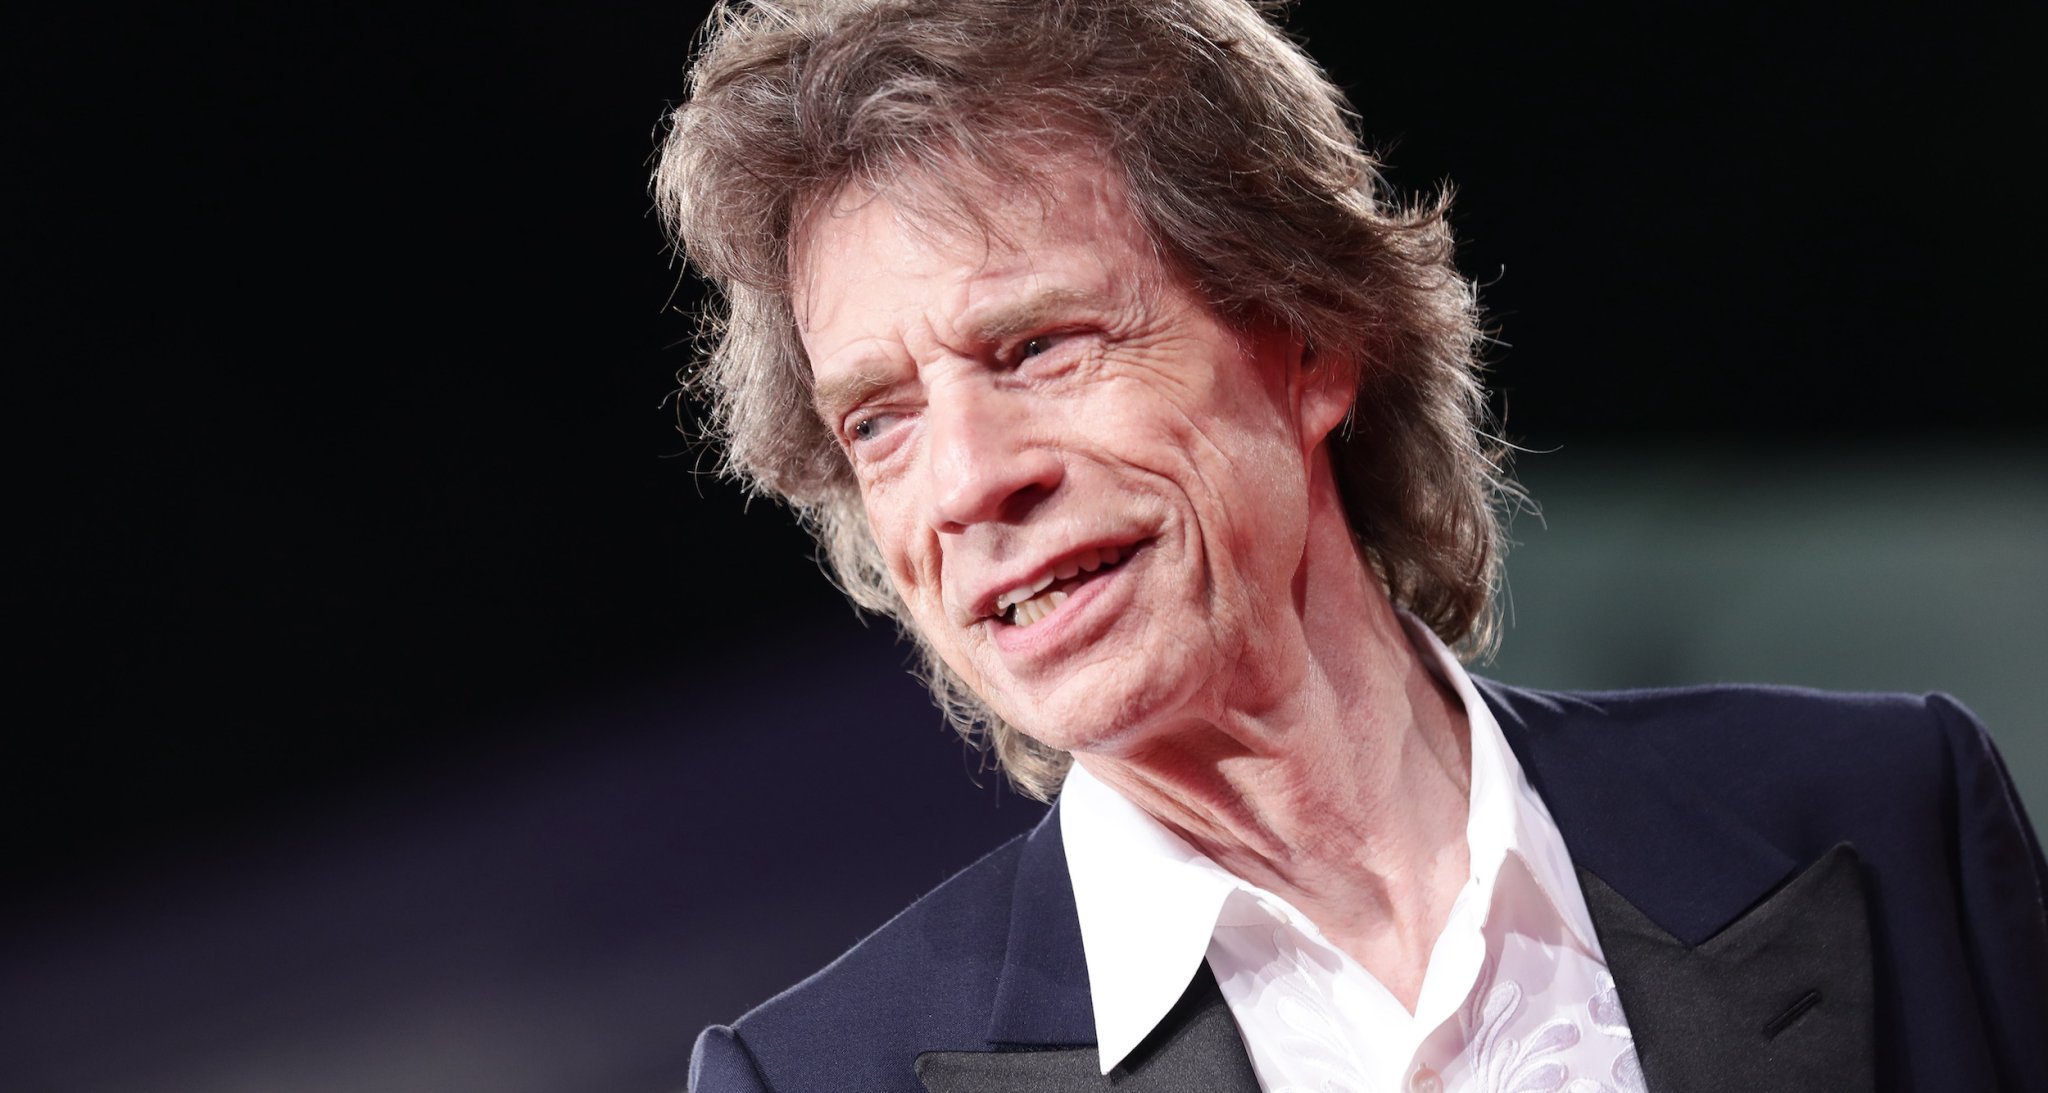 Mick Jagger takes a swipe at Harry Styles comparisons